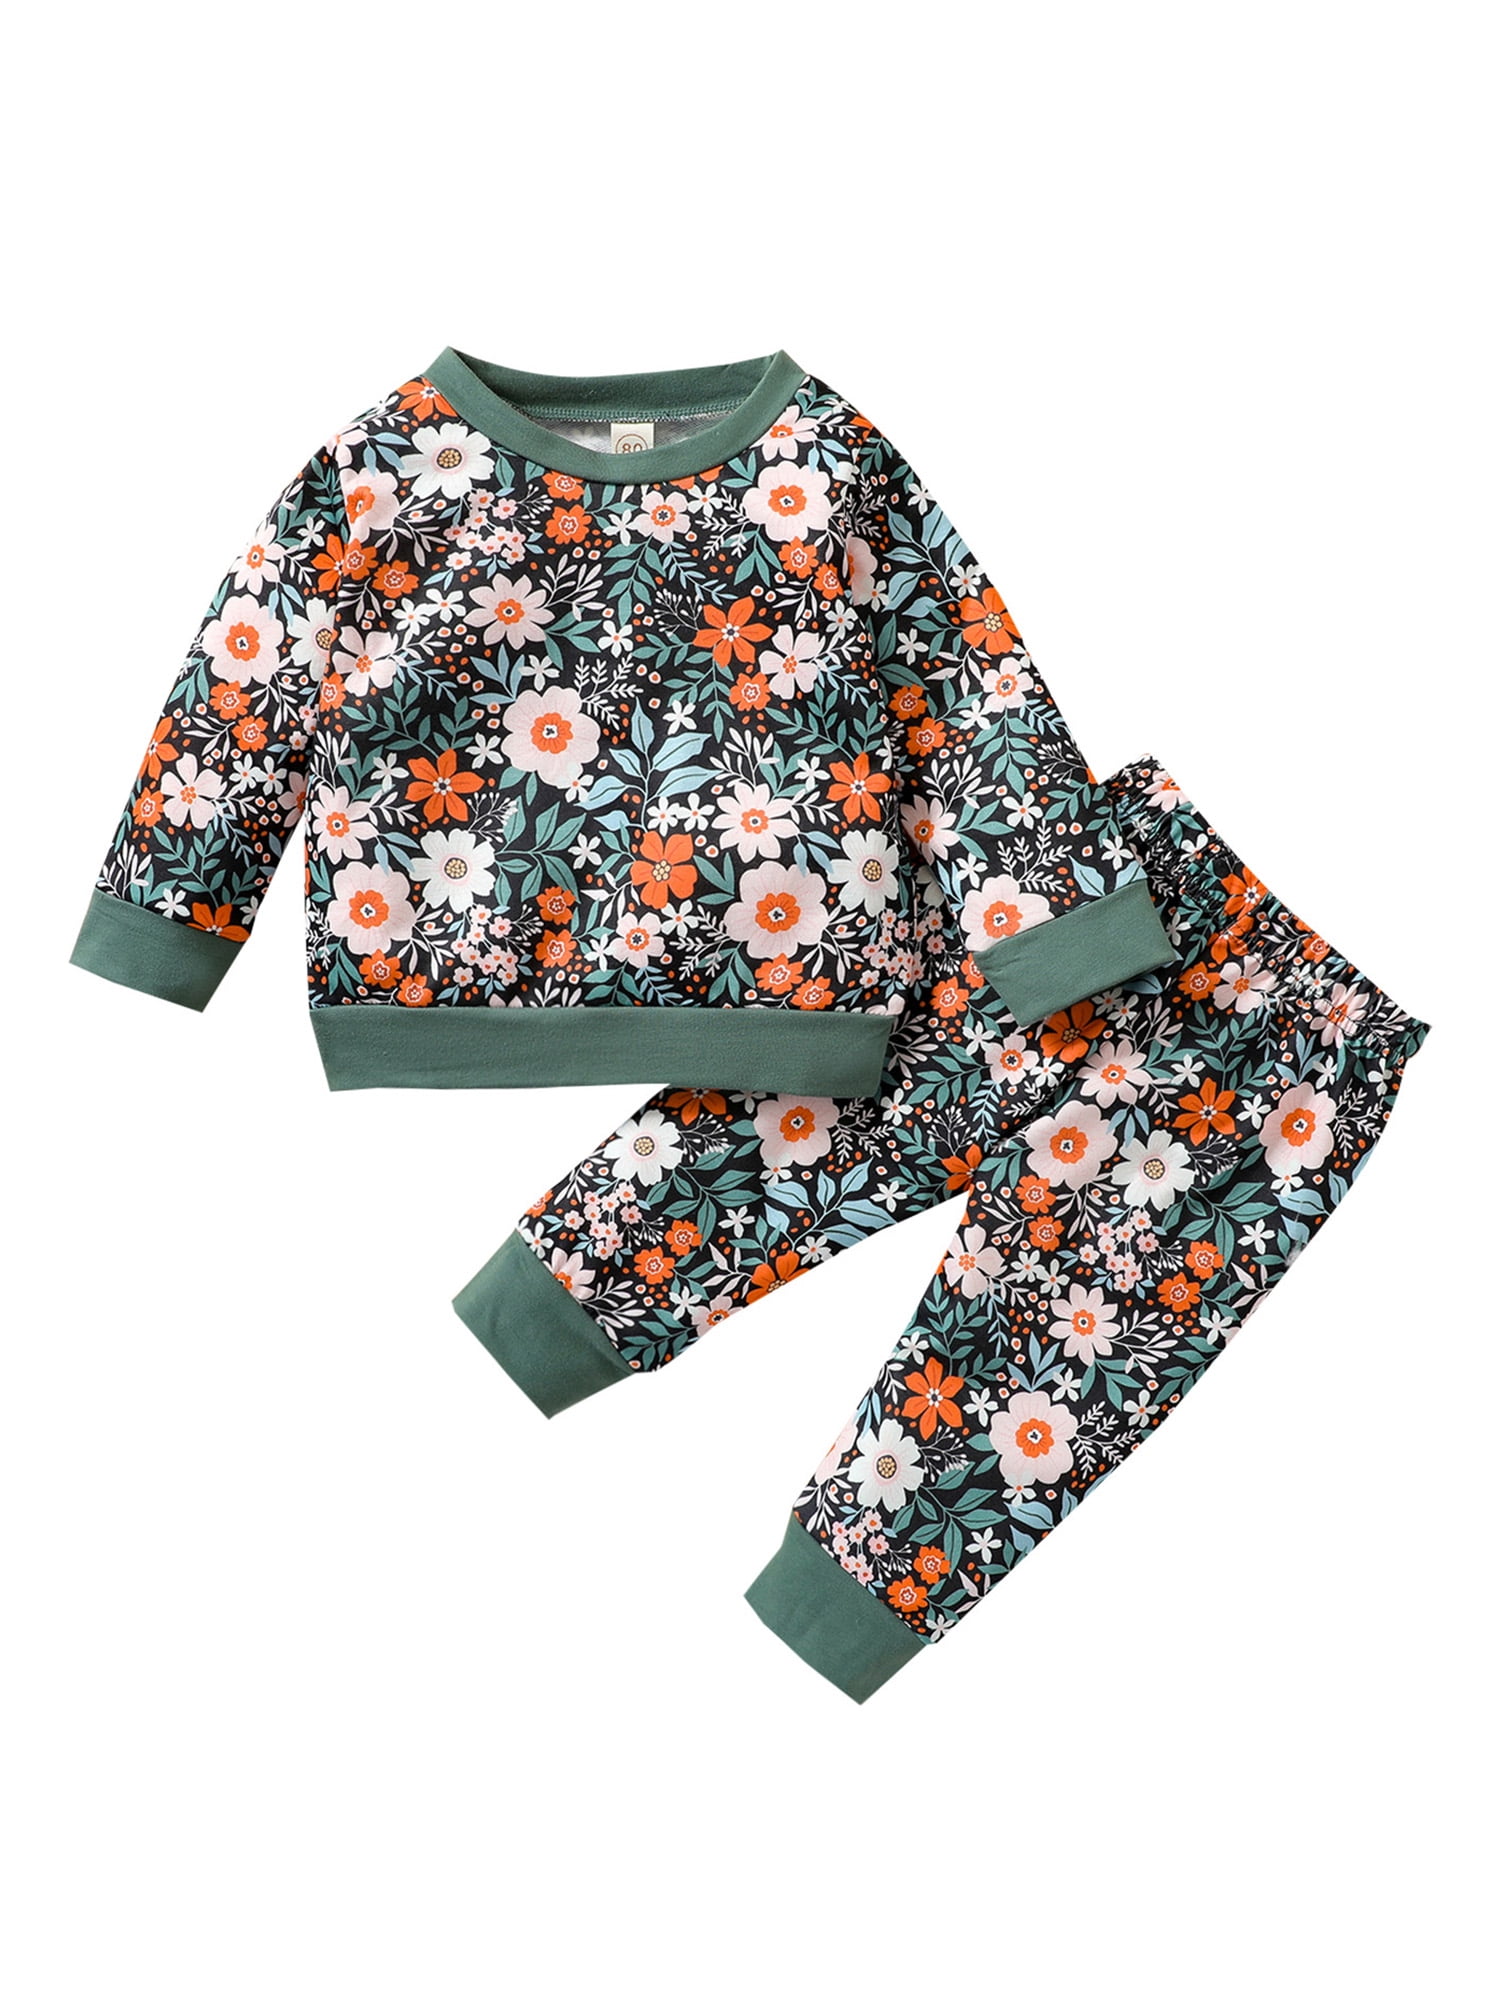 Flower Pants 2PCS Set Toddler Baby Girls Clothes Floral Long Sleeve Top 